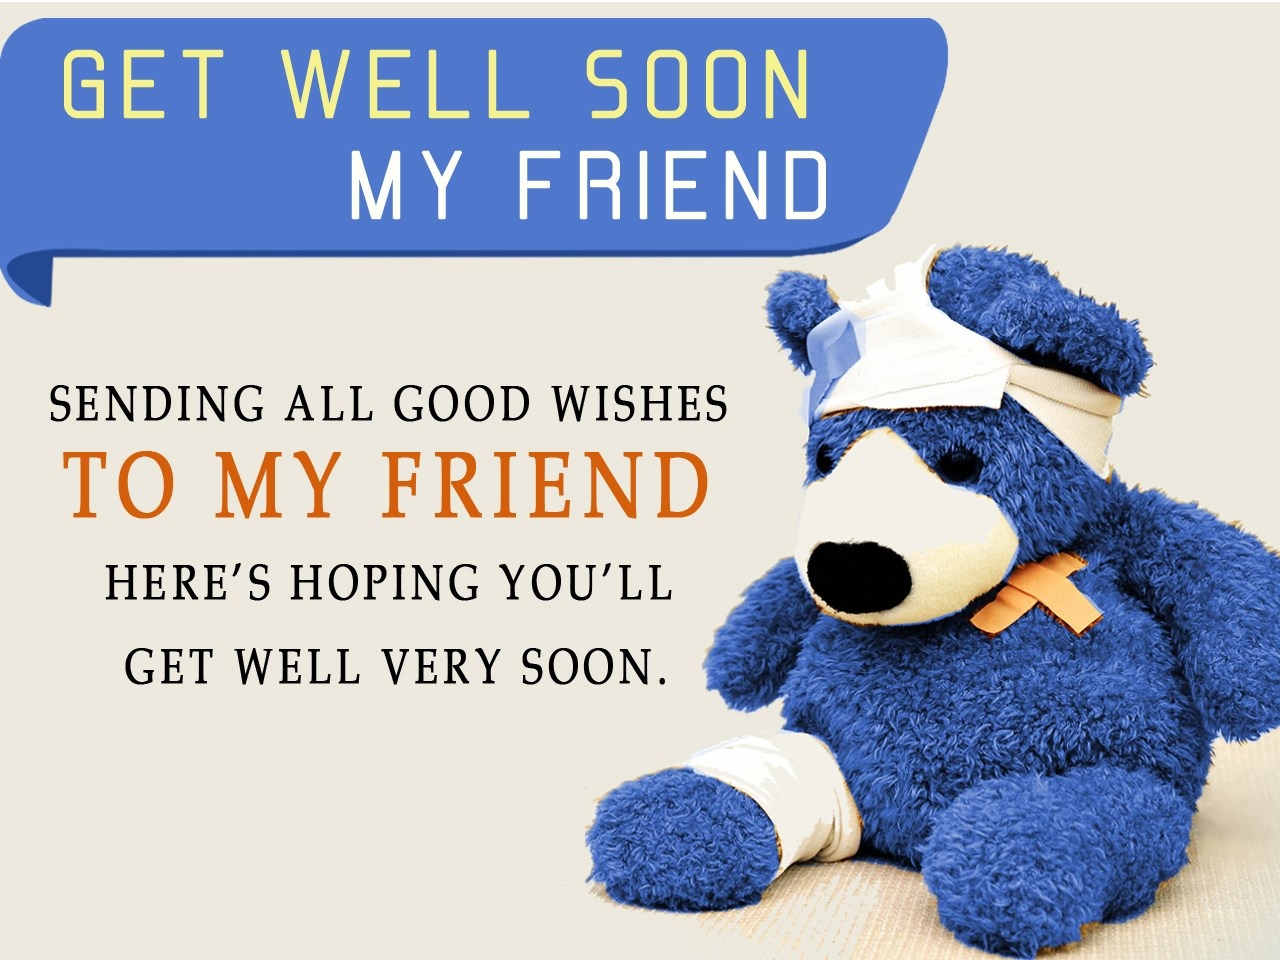 Get better picture. Get well soon. Get well soon Wishes. Get better soon. Please get well soon.